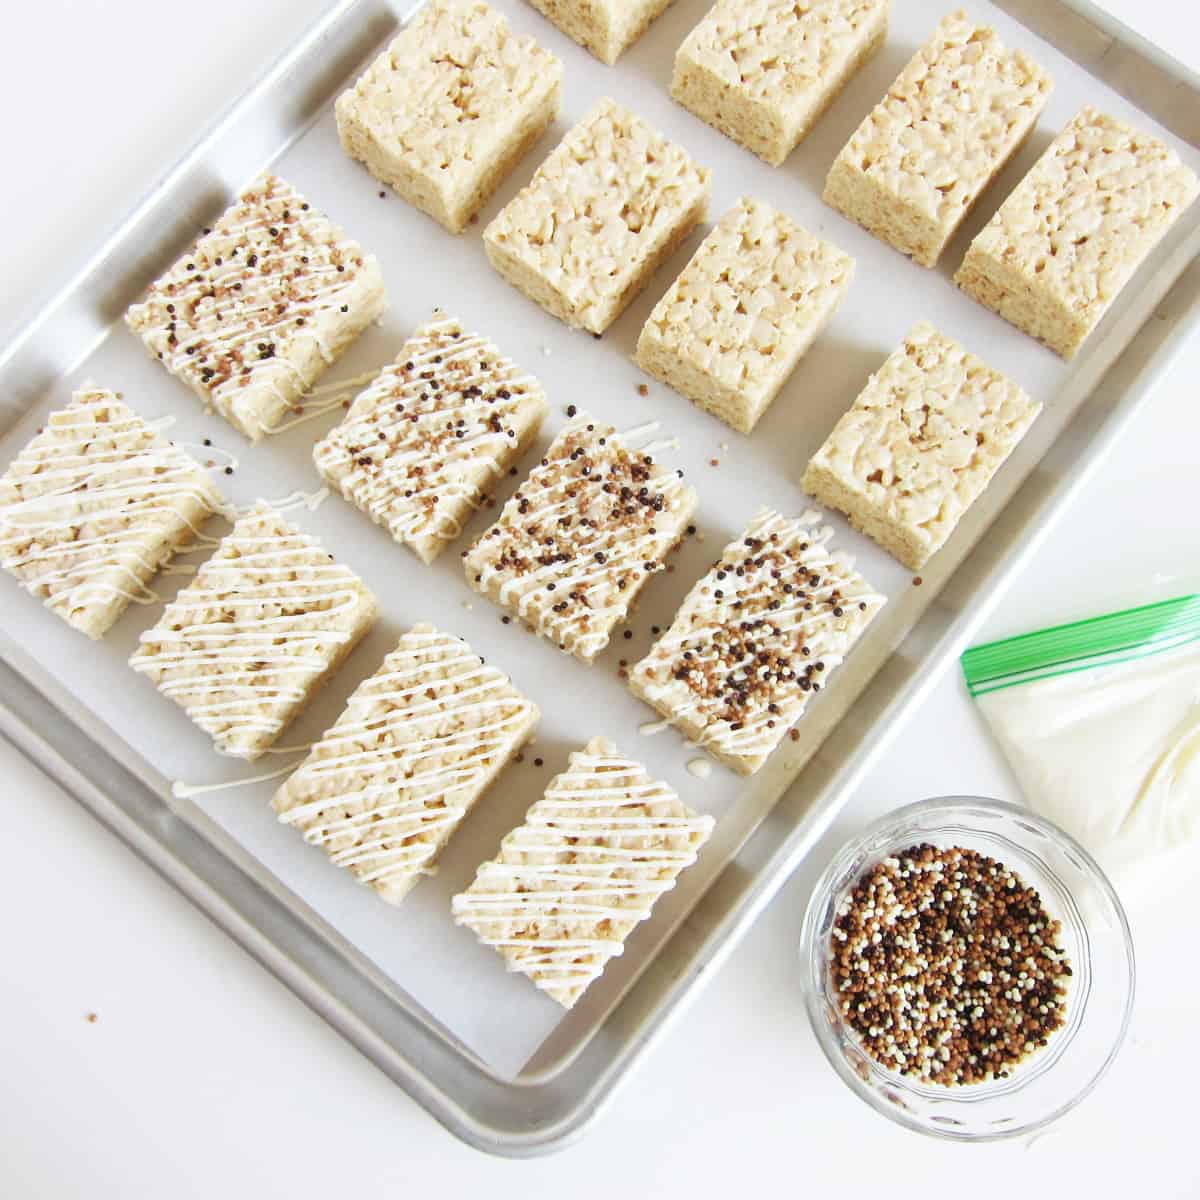 White chocolate crispy treats topped with a drizzle of white chocolate and dark, milk, and white Crispearls.